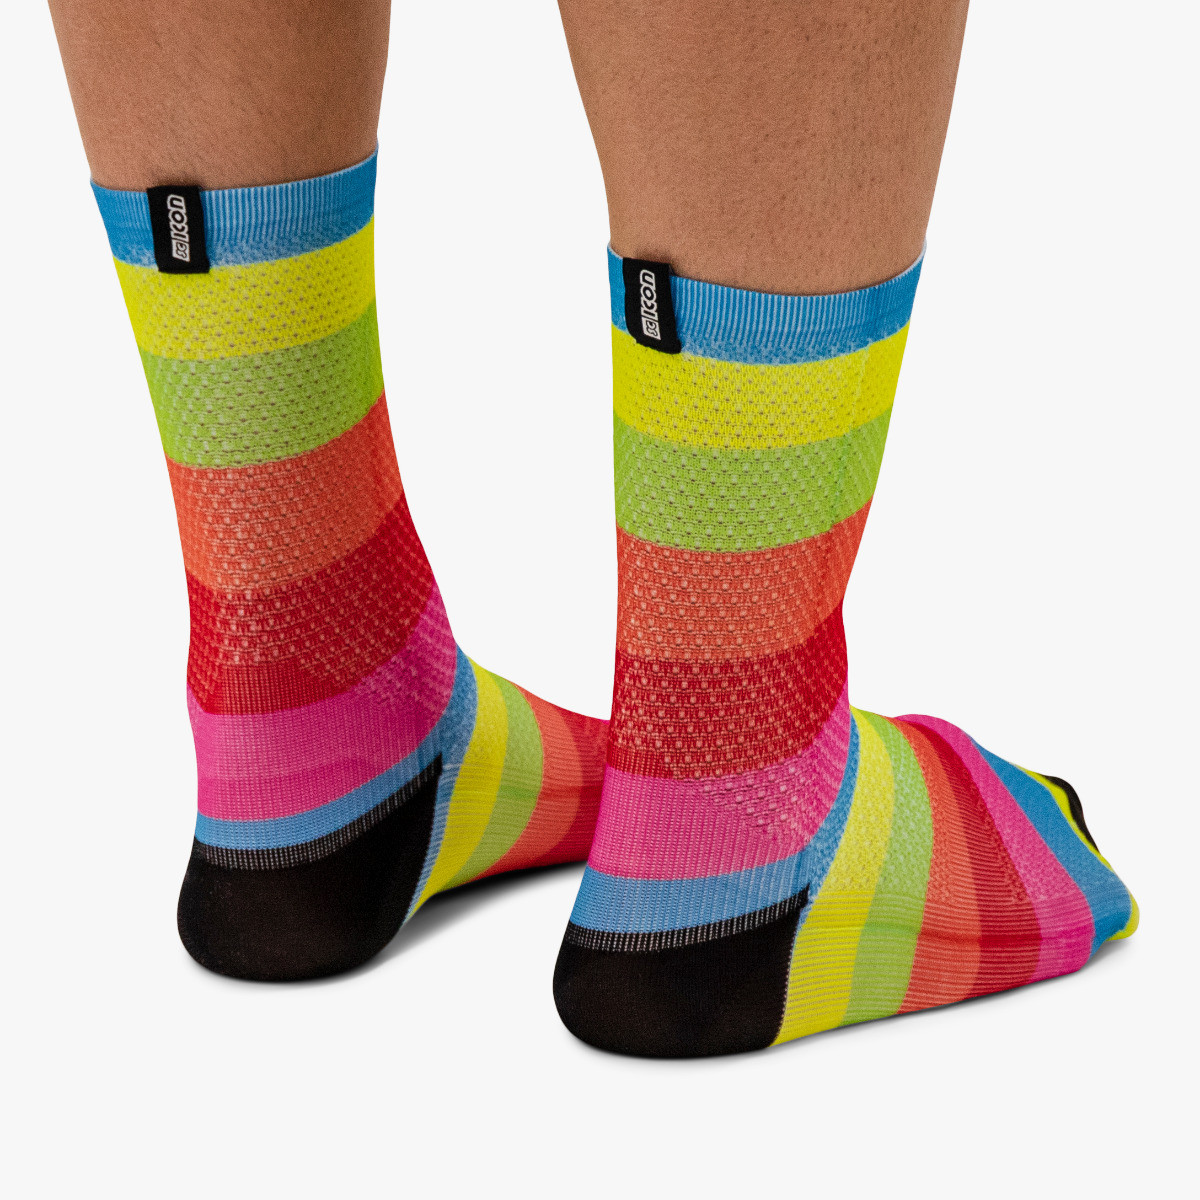 cycling performance socks men women scicon collection socks220